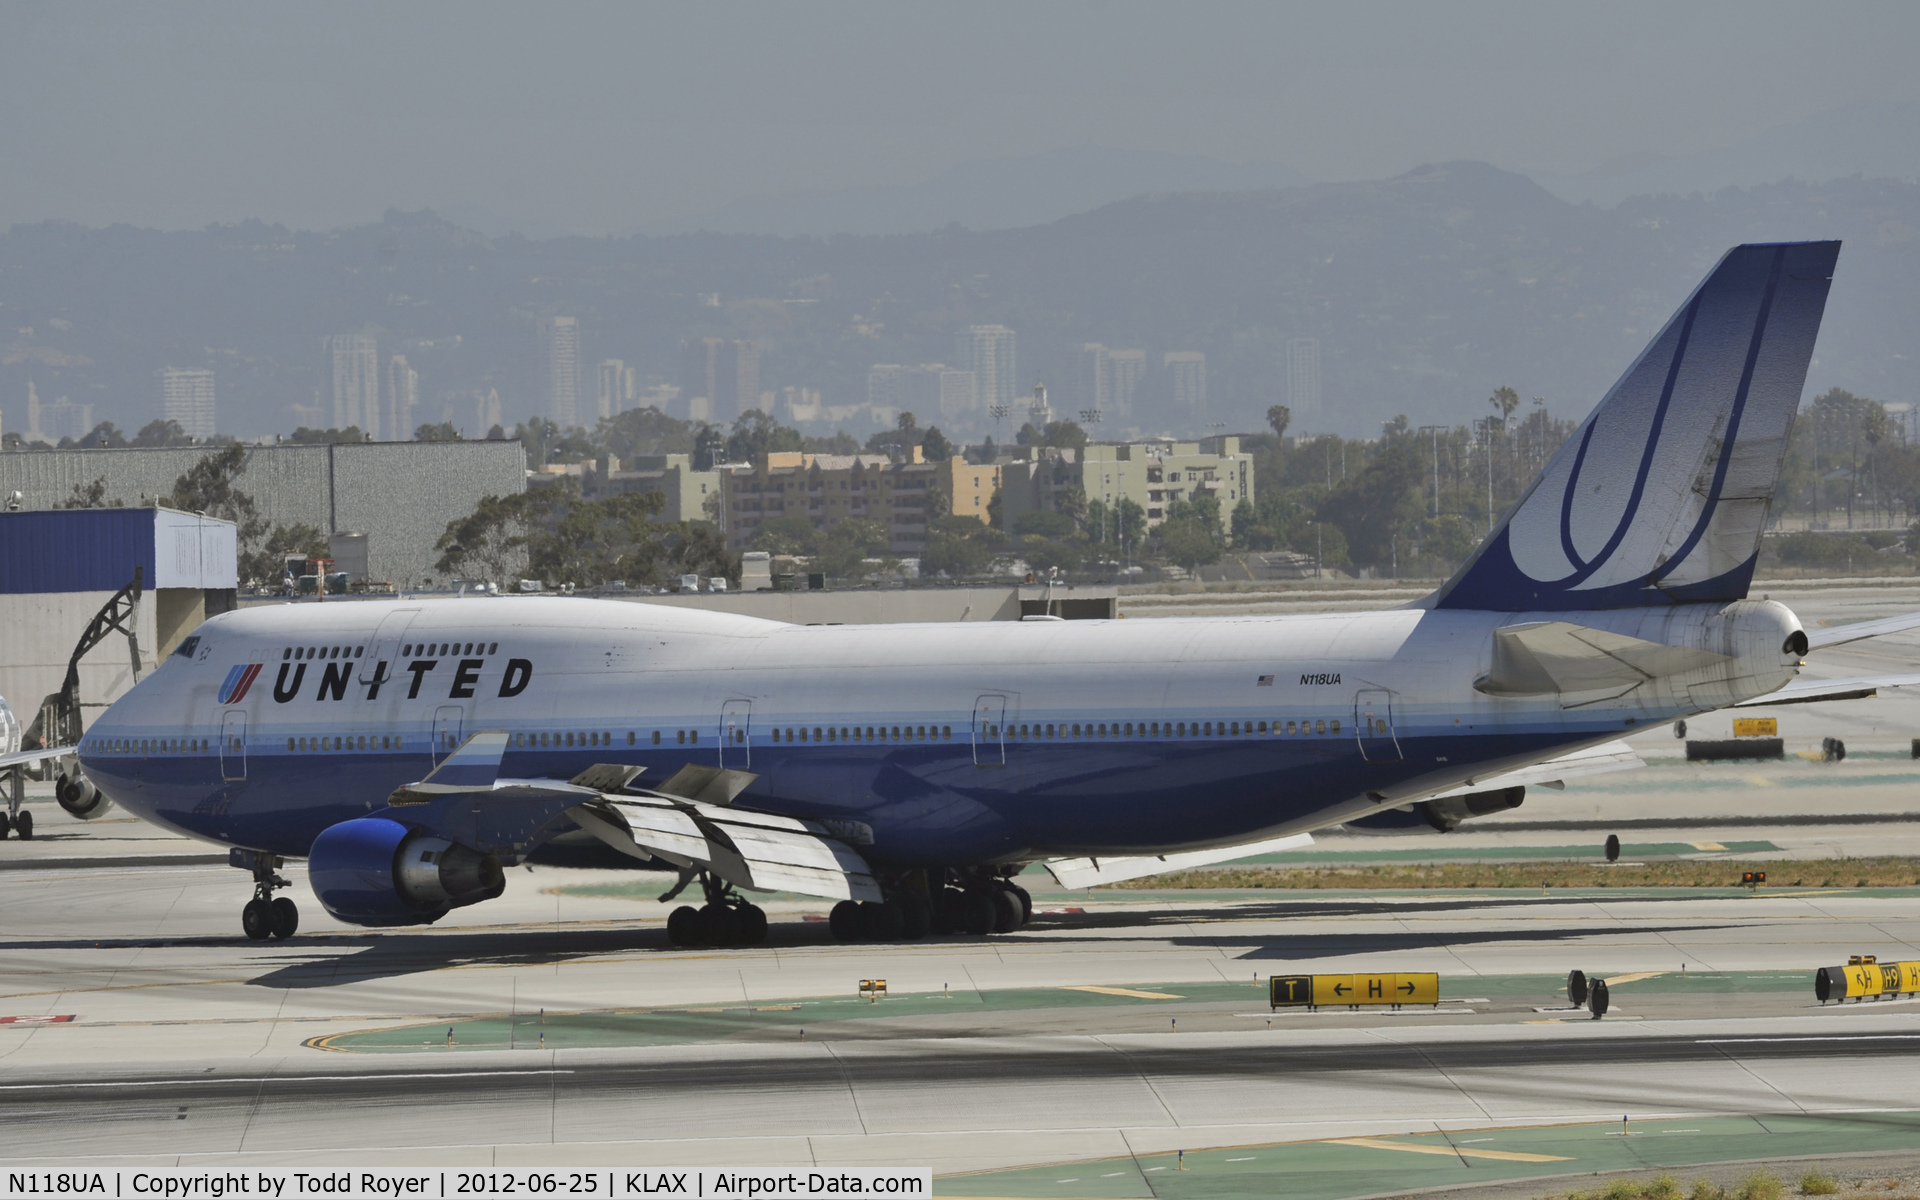 N118UA, 1999 Boeing 747-422 C/N 28811, Taxing to gate after arriving on 25L at LAX